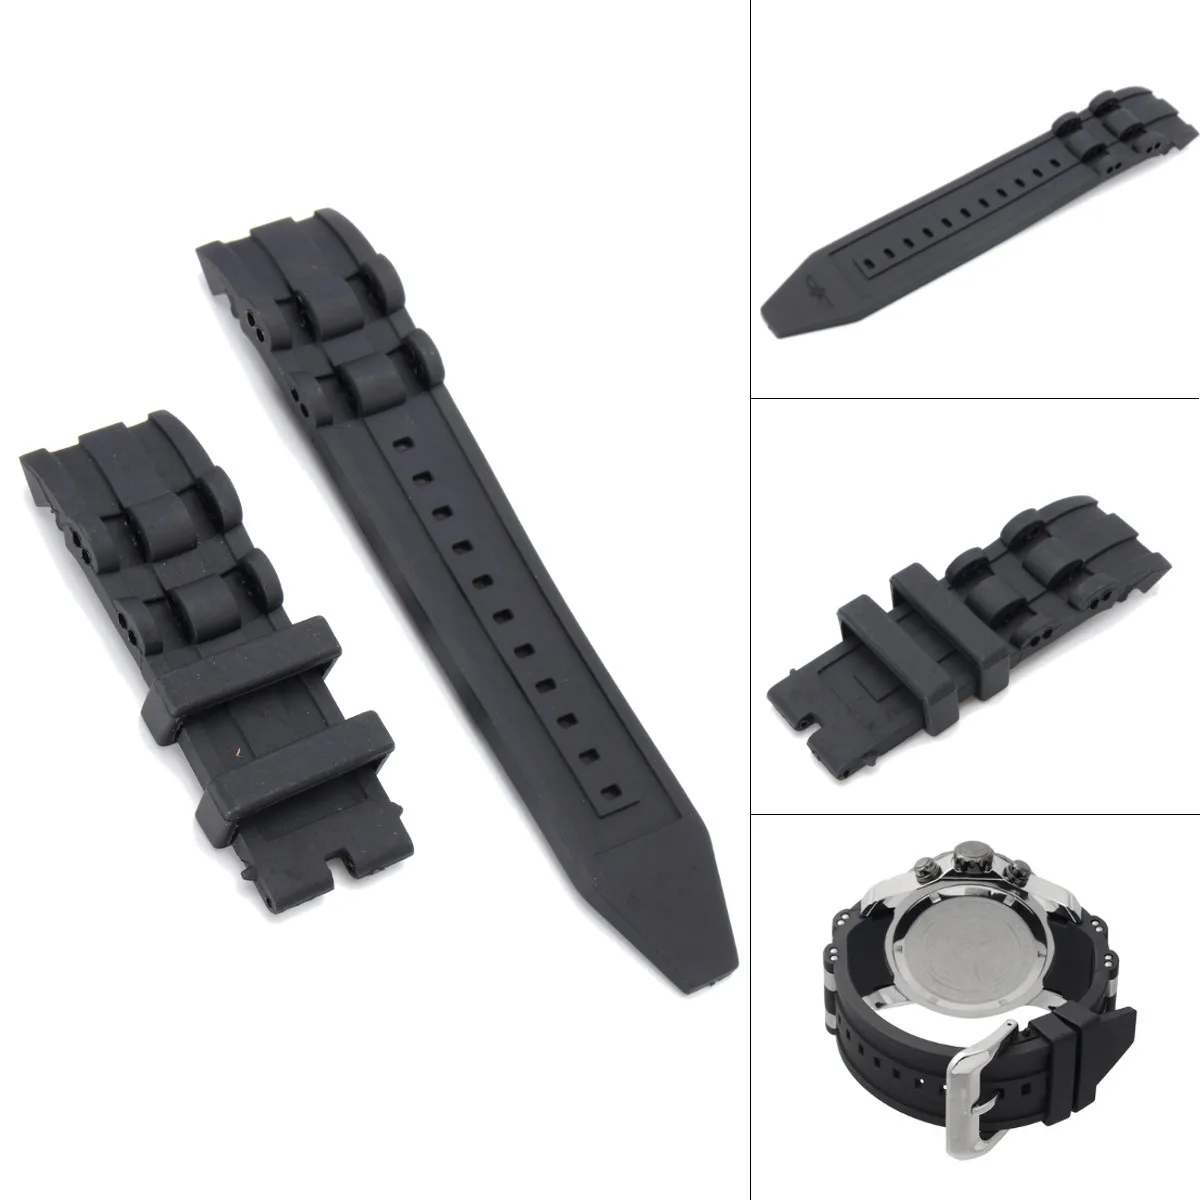 

26mm Silicone Rubber Black WatchBand Strap Replacement For Invicta-Pro Diver 6977 Waterproof Luxury Men Wristband Watch Bracelet